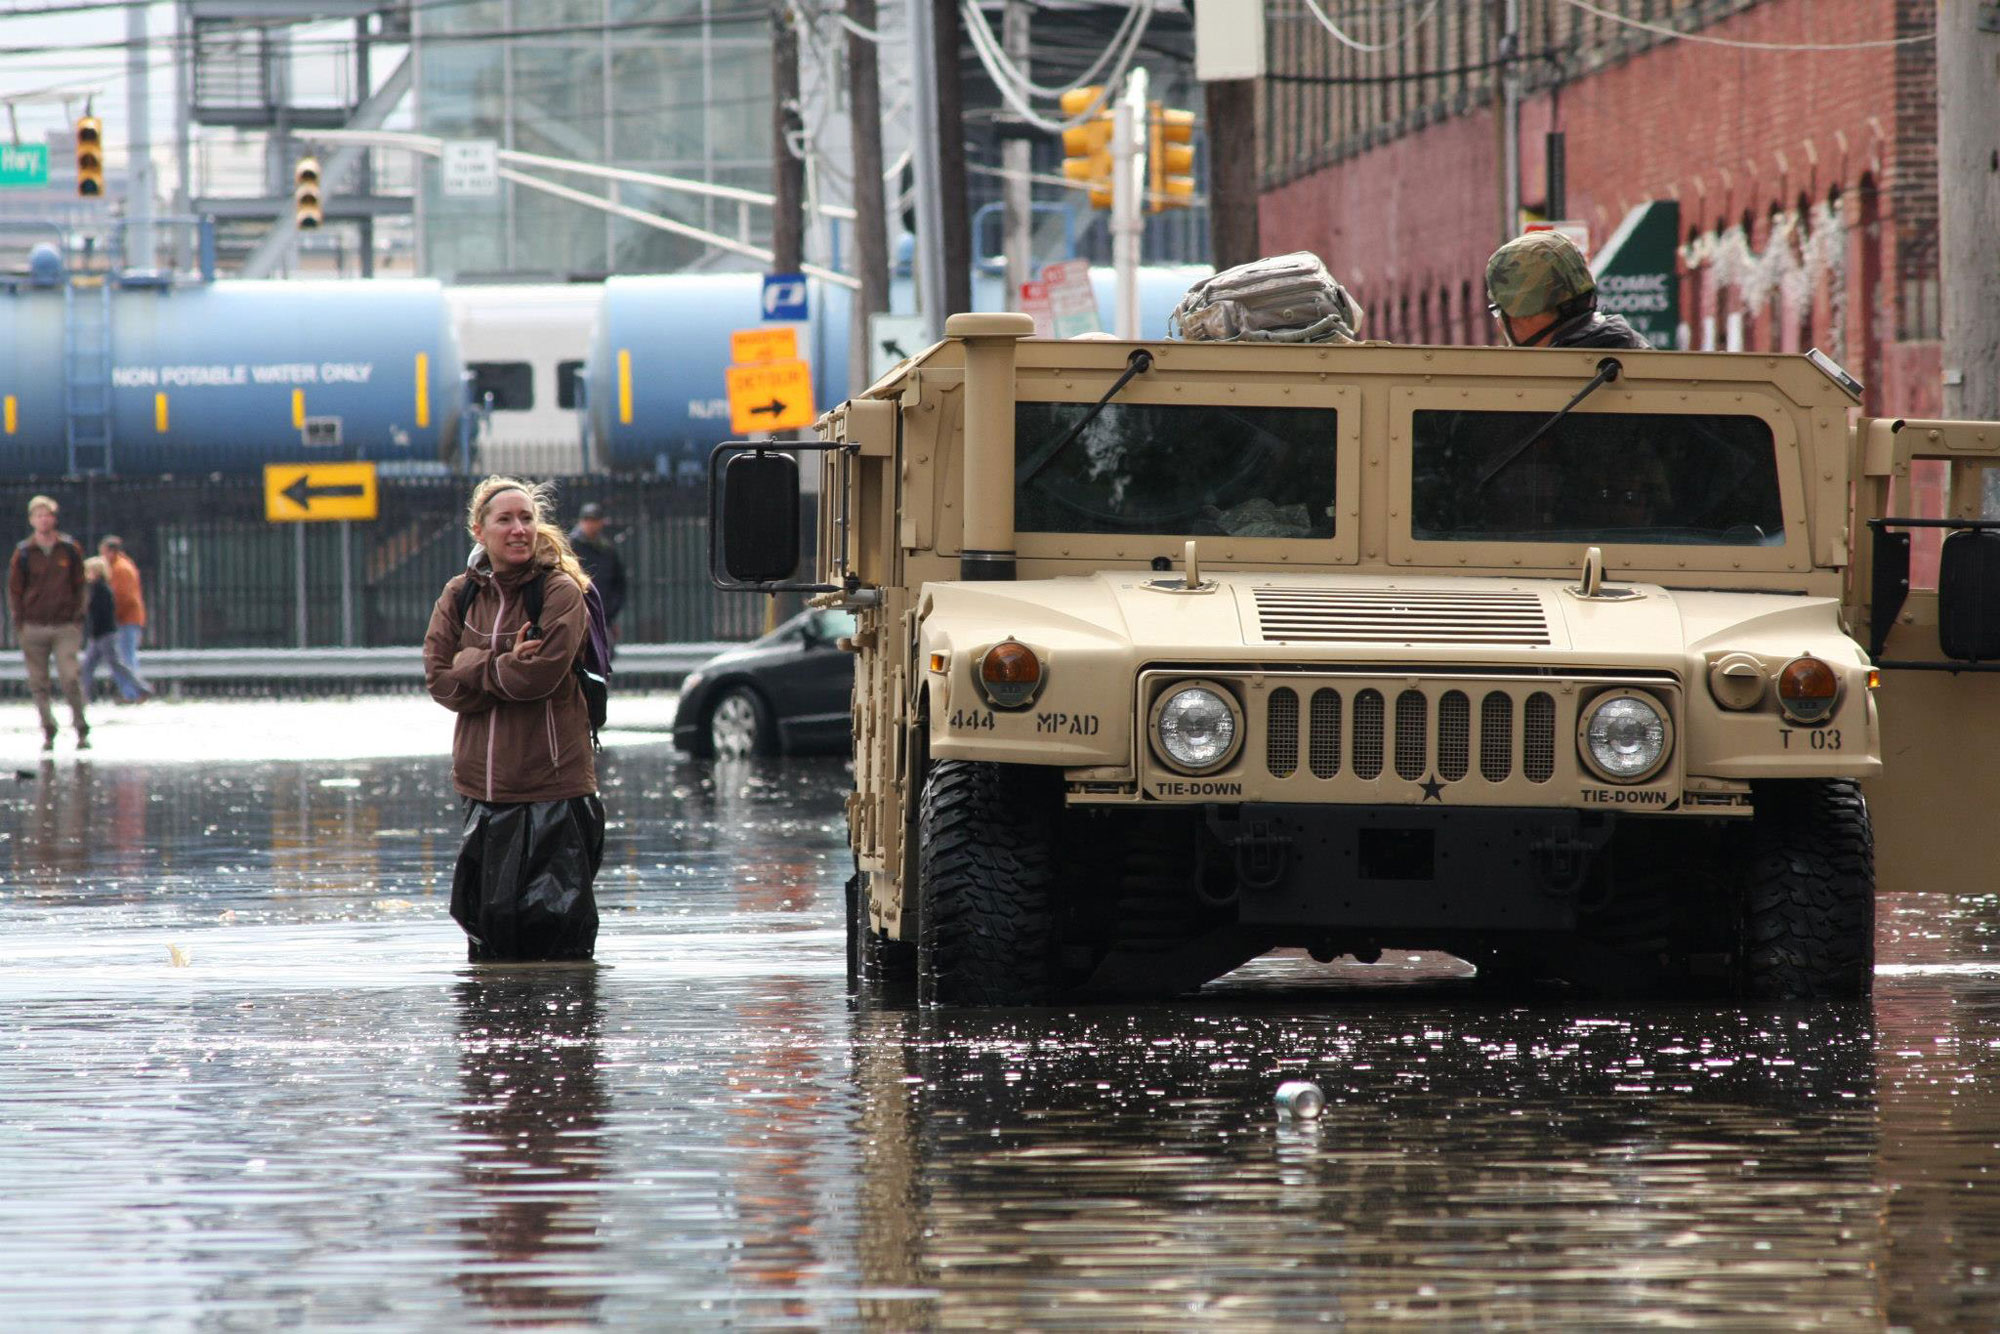 Photograph of flooding in the aftermath of Hurricane Sandy, Hoboken, New Jersey. The photo shows a beige humvee driving down a road coverd with shallow floodwaters. A woman stands to the left of the humvee in the water. She is wearing a brown coat and appears to have a plastic bag covering her legs. More people and part of a car can be seen in the background.